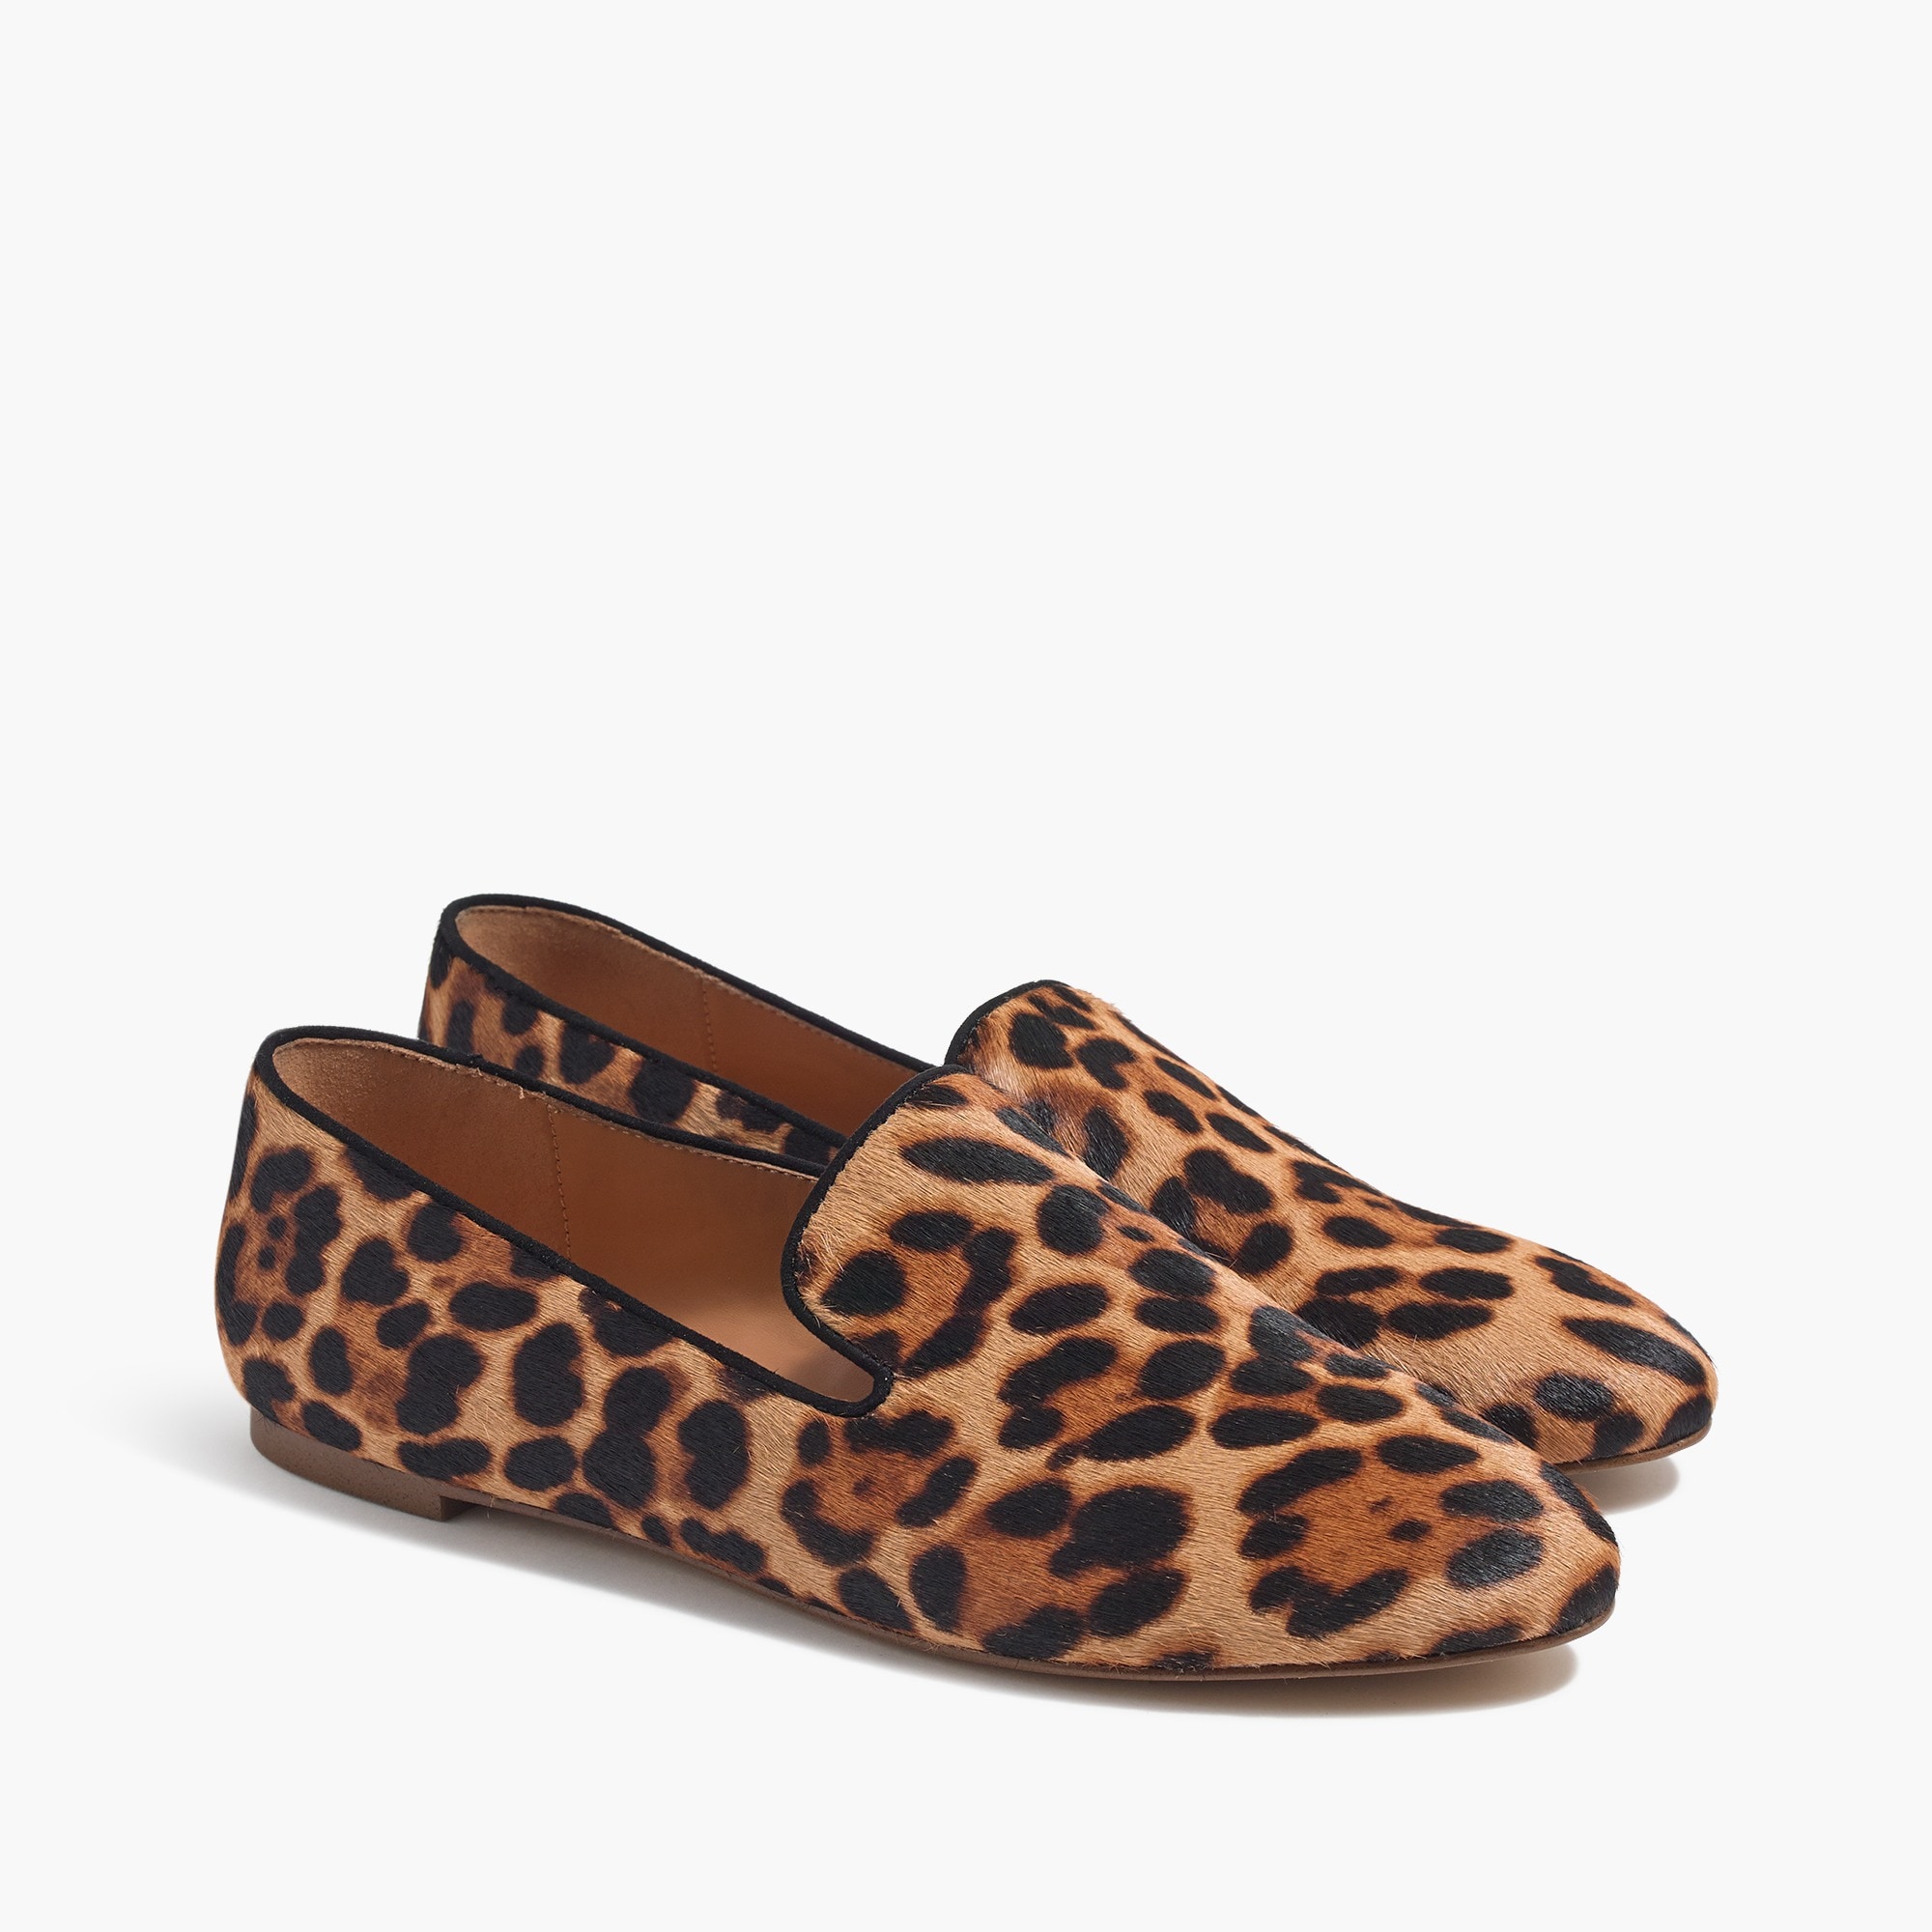 Leopard Calf Hair Smoking Loafers For Women